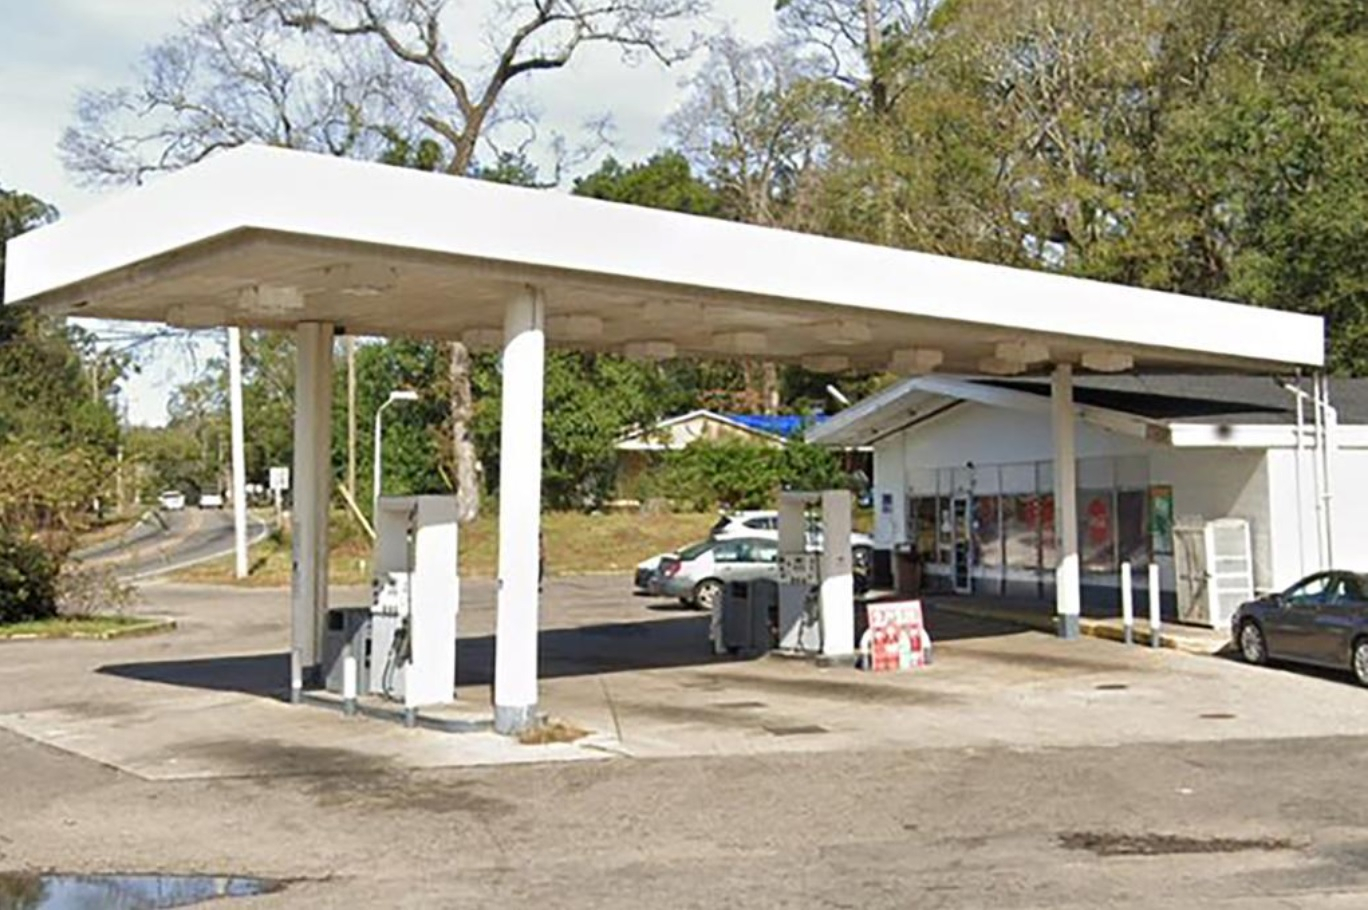 Dismembered Human Penis Found in Parking Lot of Alabama Gas Station ...